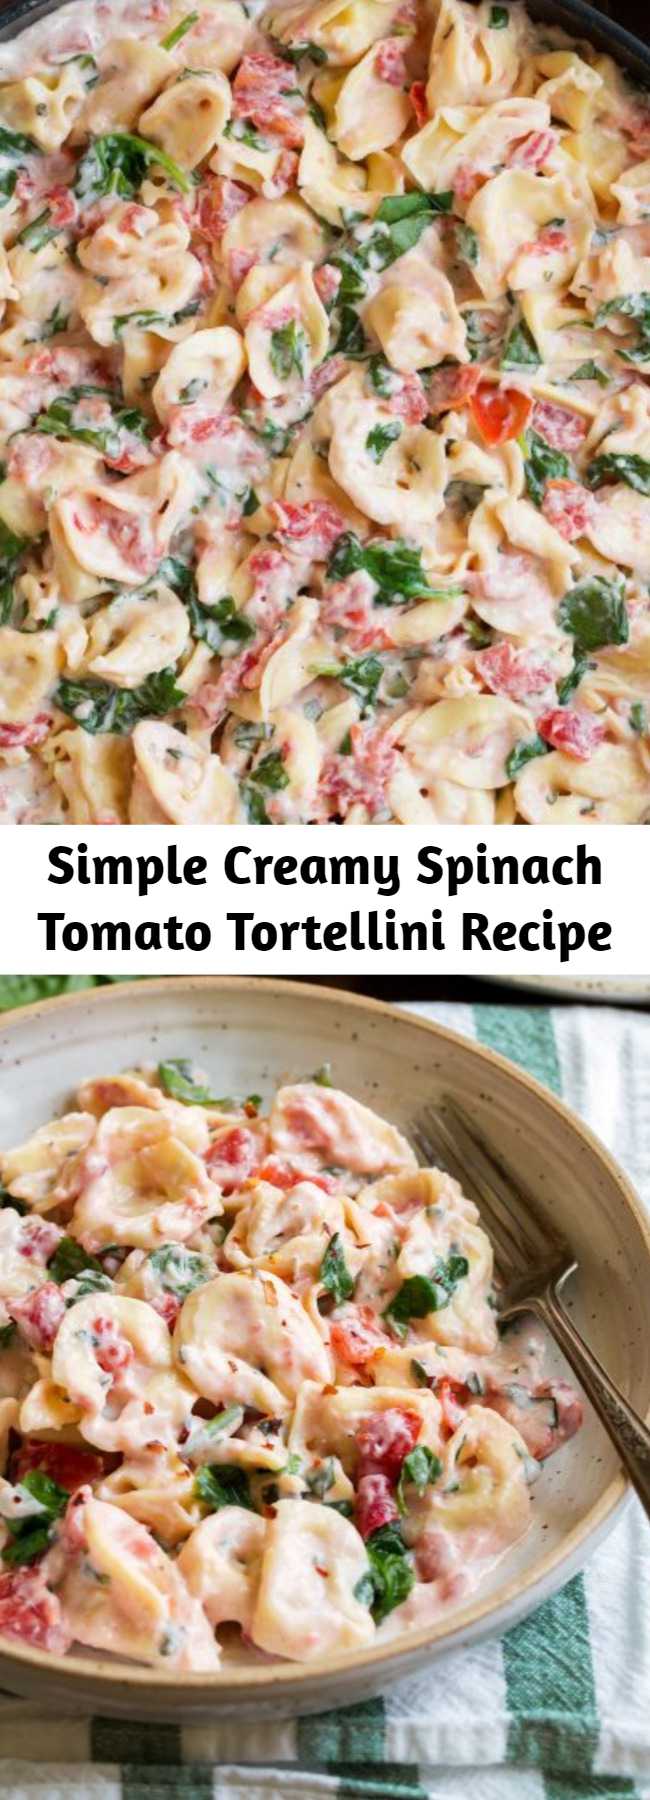 Simple Creamy Spinach Tomato Tortellini Recipe - This Creamy Spinach Tomato Tortellini is so simple and comforting plus its impressive enough to serve to guests when entertaining or to simply curl up with on the sofa. Either way, you'll love it!